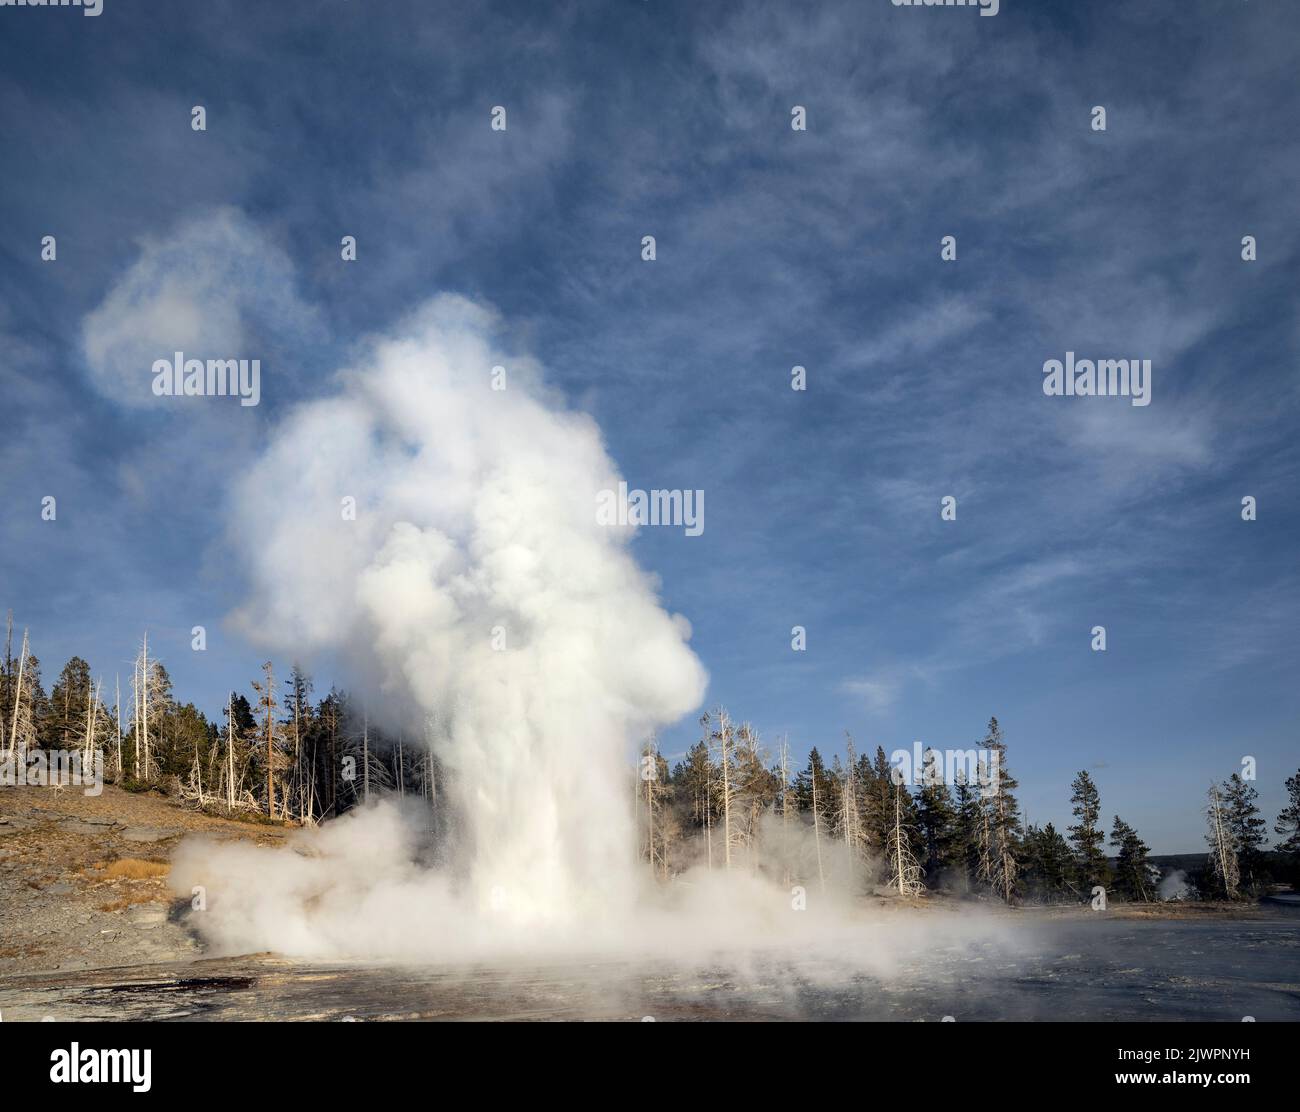 WY05039-00....WYOMING - Grand Geyser in the Upper Geyser Basin of the Old Faithful area, Yellowstone National Park. Stock Photo